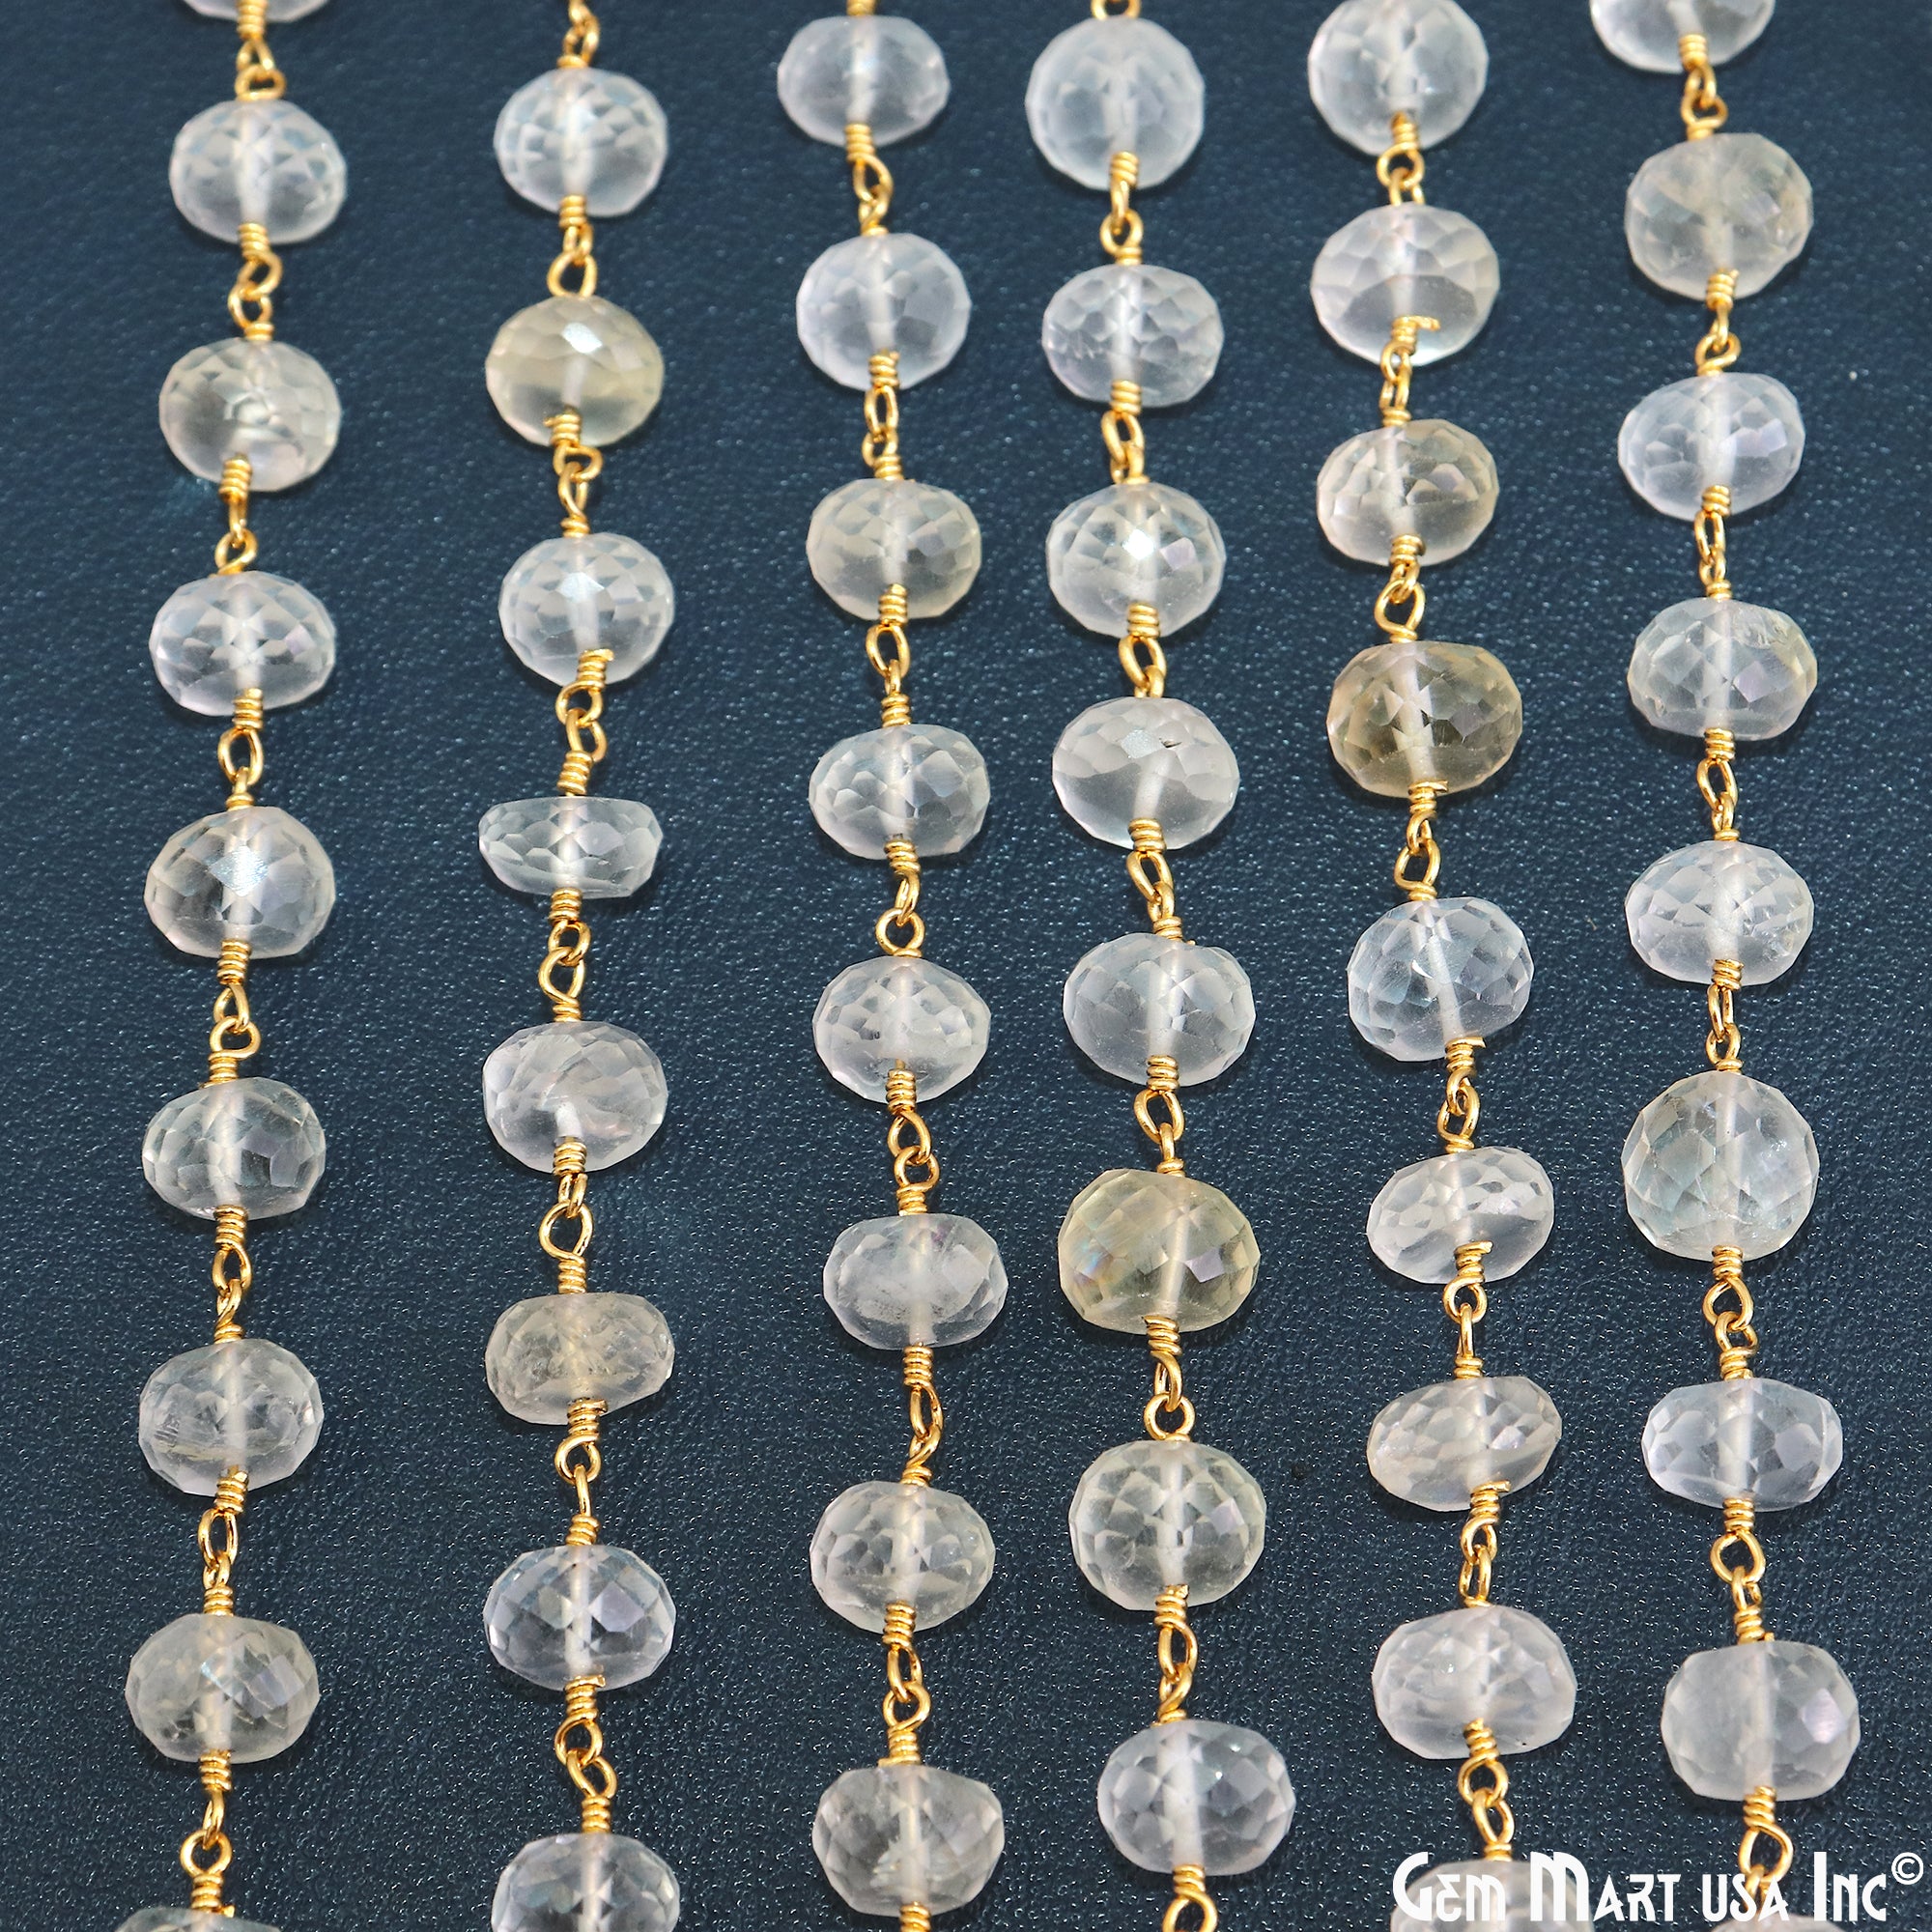 Citrine Faceted Beads 7-8mm Gold Plated Wire Wrapped Rondelle Rosary Chain